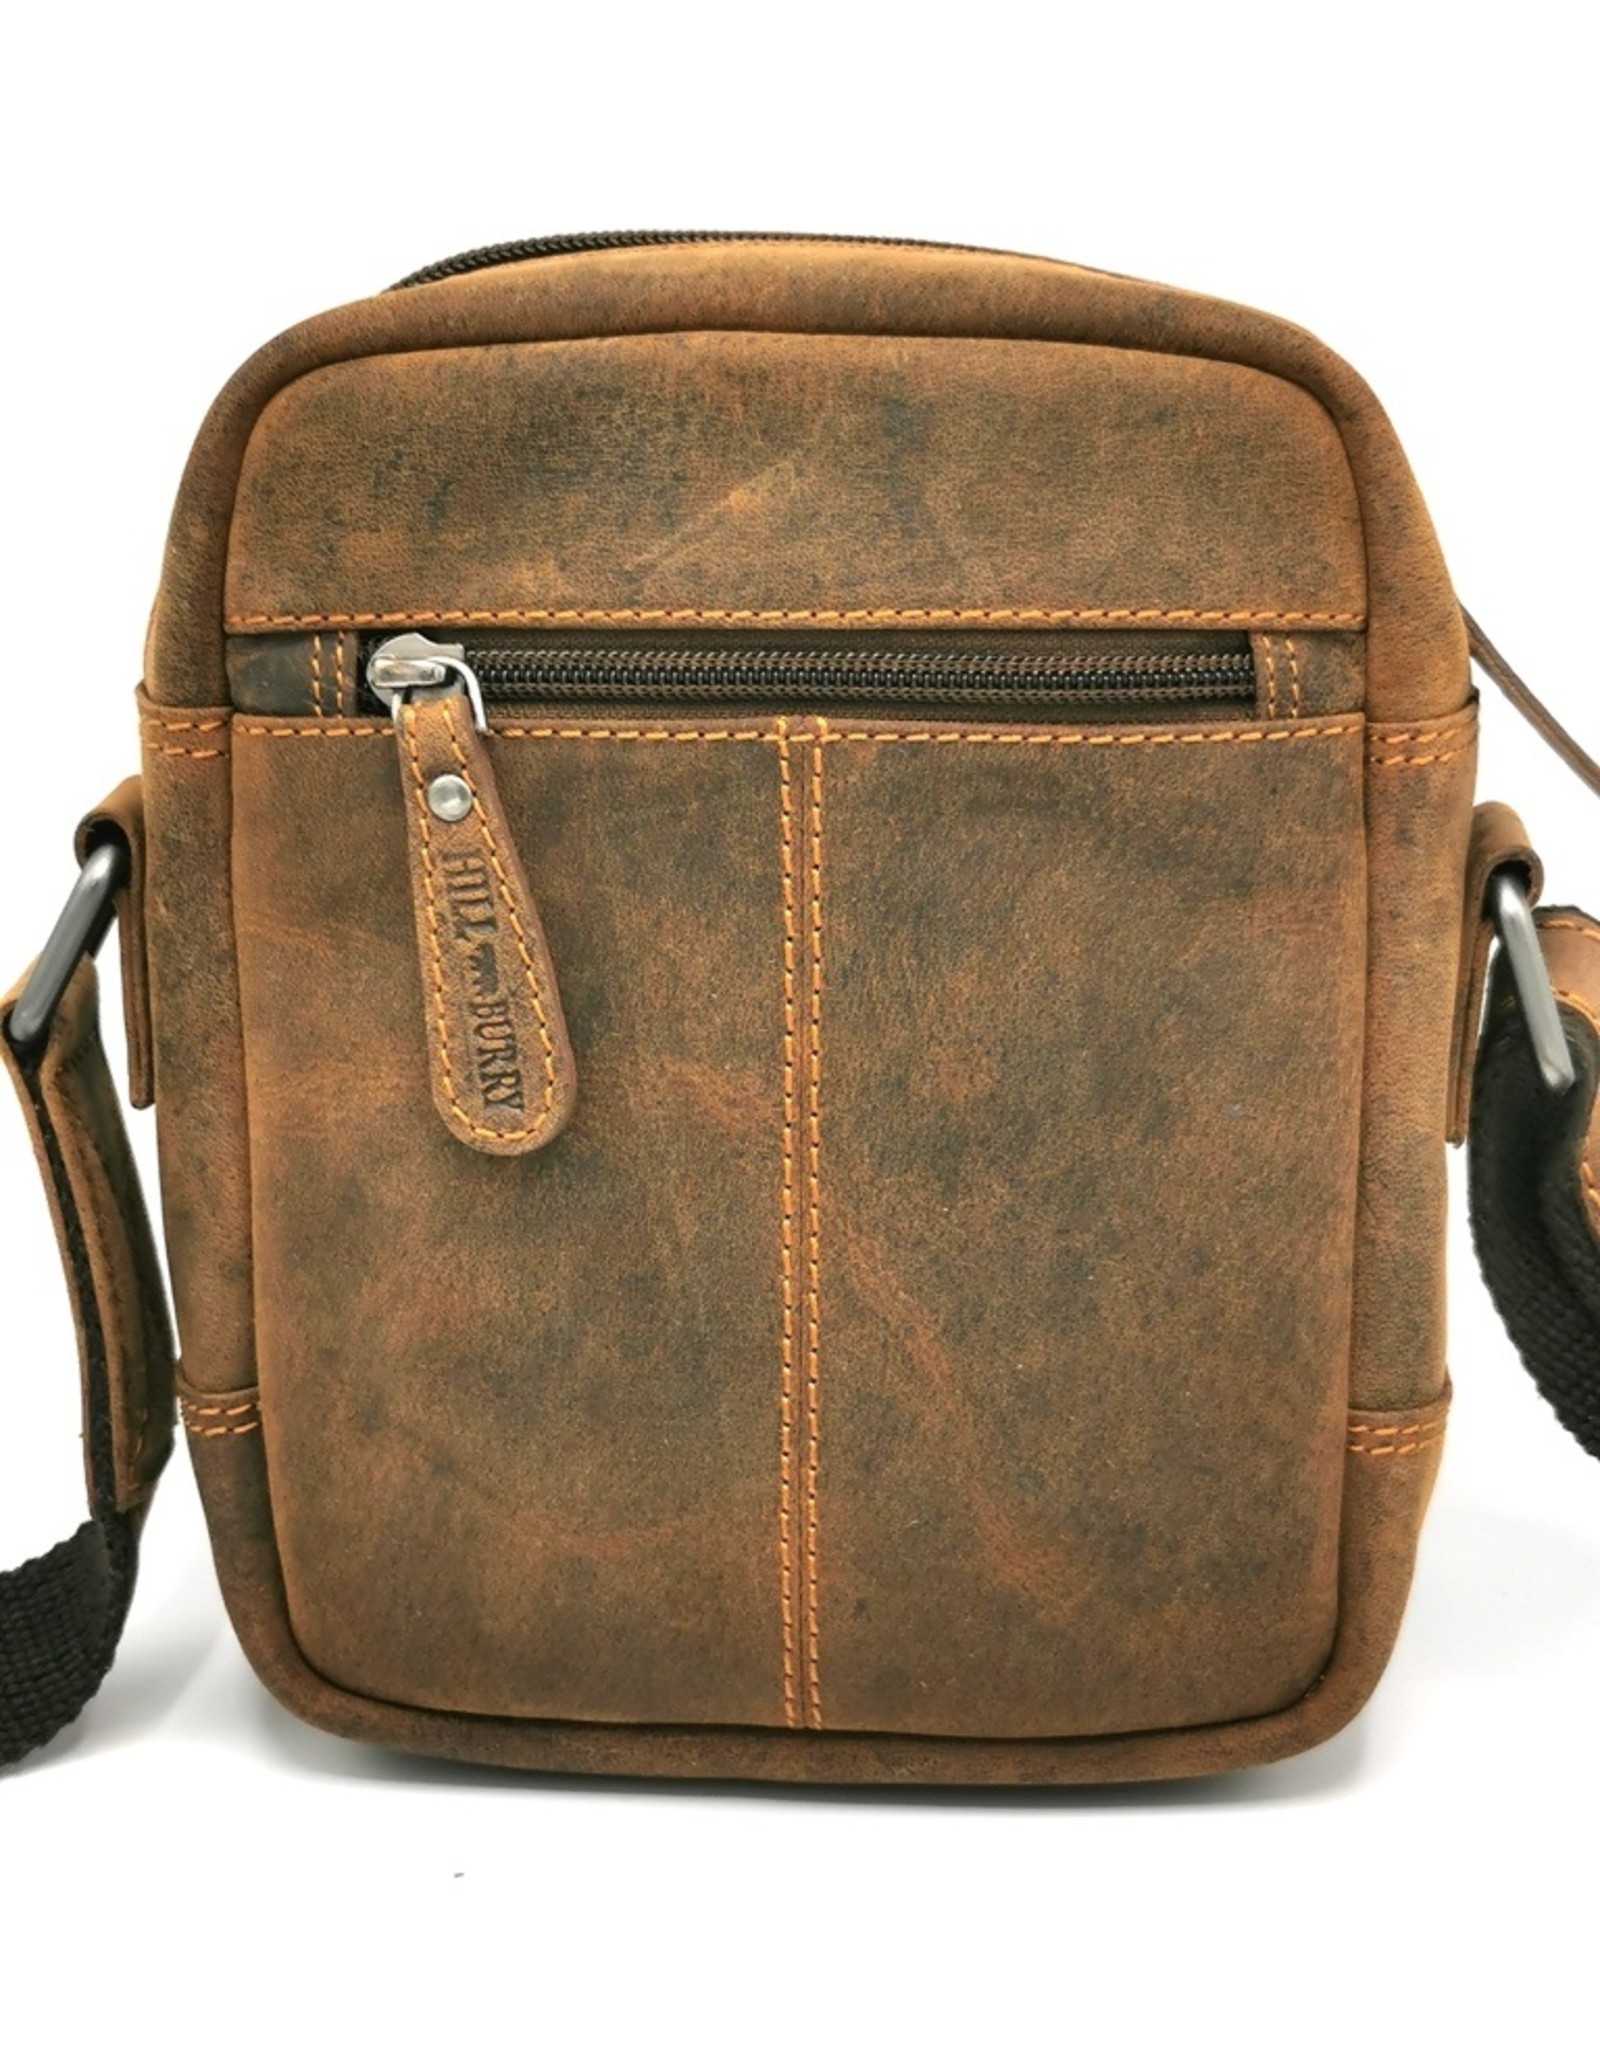 HillBurry Leather bags - HillBurry Leather Shoulder bag HT-05 small MT